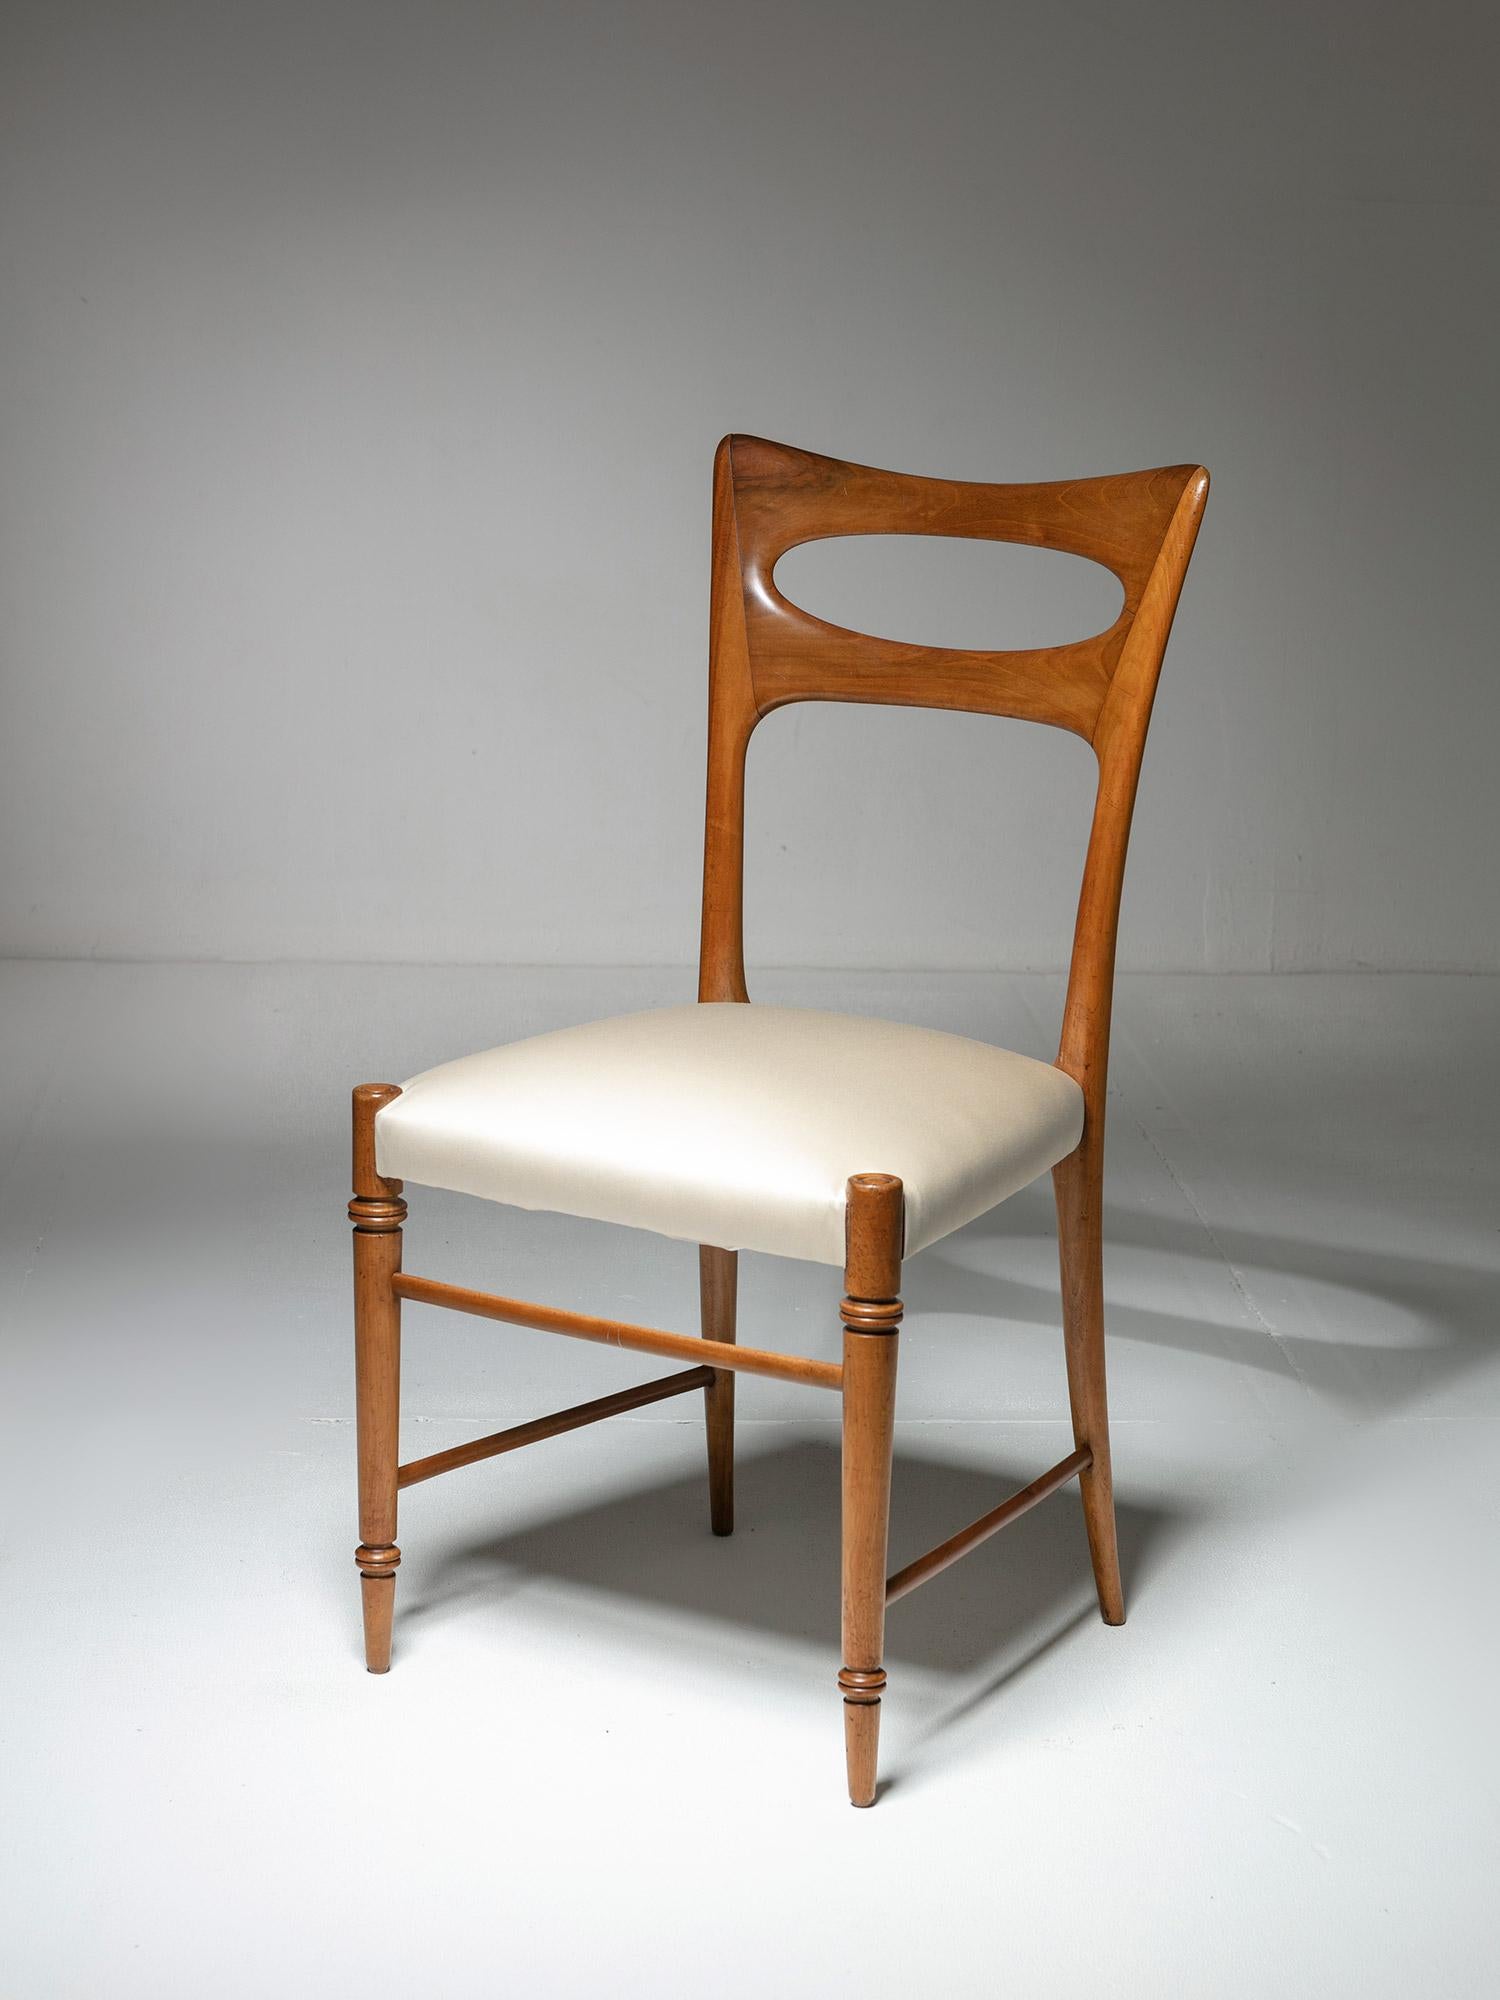 Rare chair by Paolo Buffa.
Cherry wood frame and newly upholstered seat.